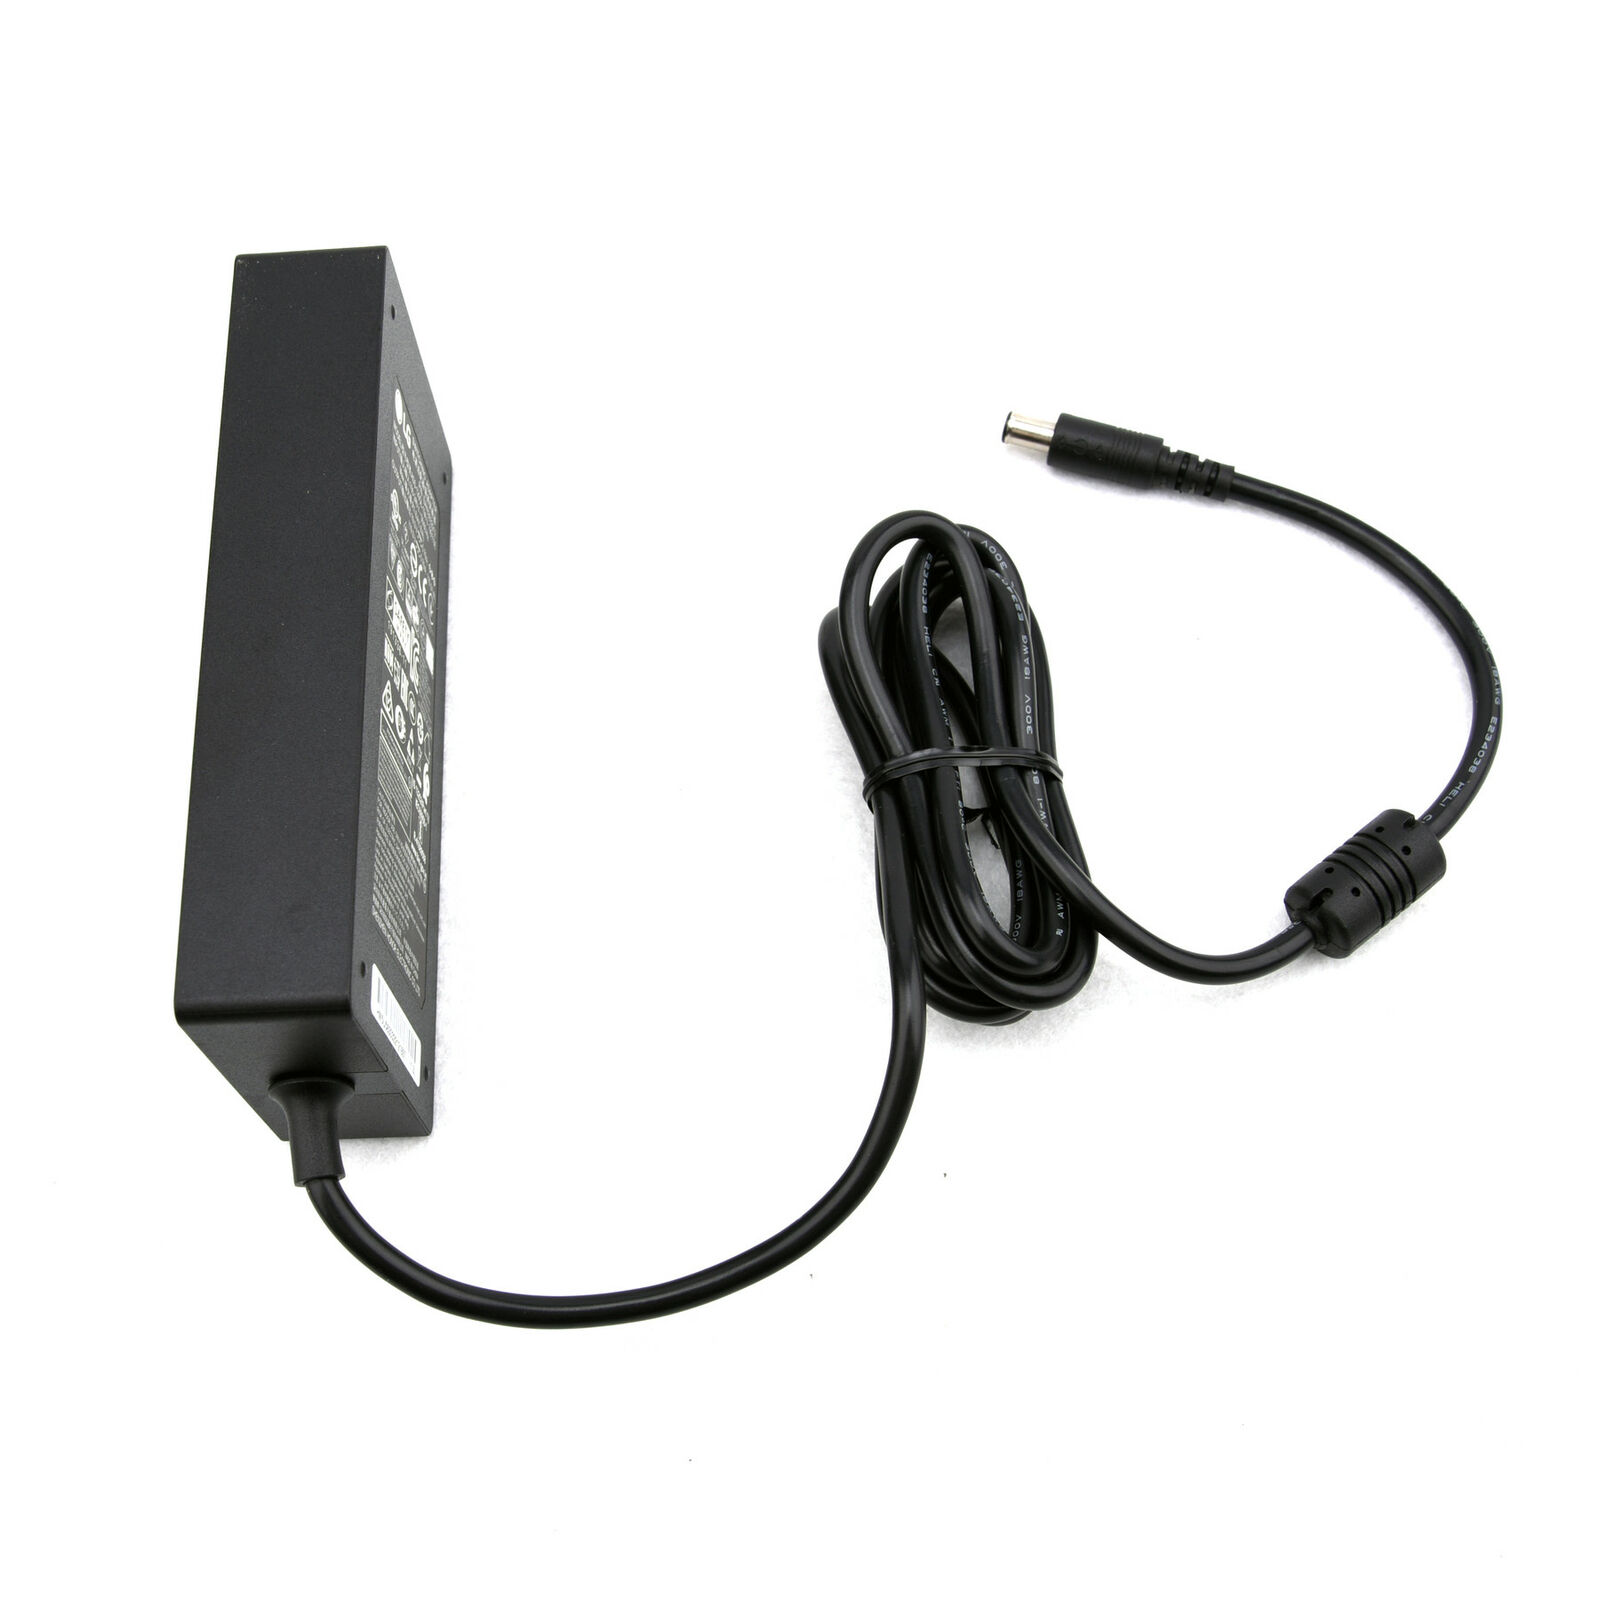 LG IPS LED Monitor AC Adapter Power Supply 19V 5.79A ADS-120QL-19A-3 Brand LG Compatible Brand LG Country/Region of Ma